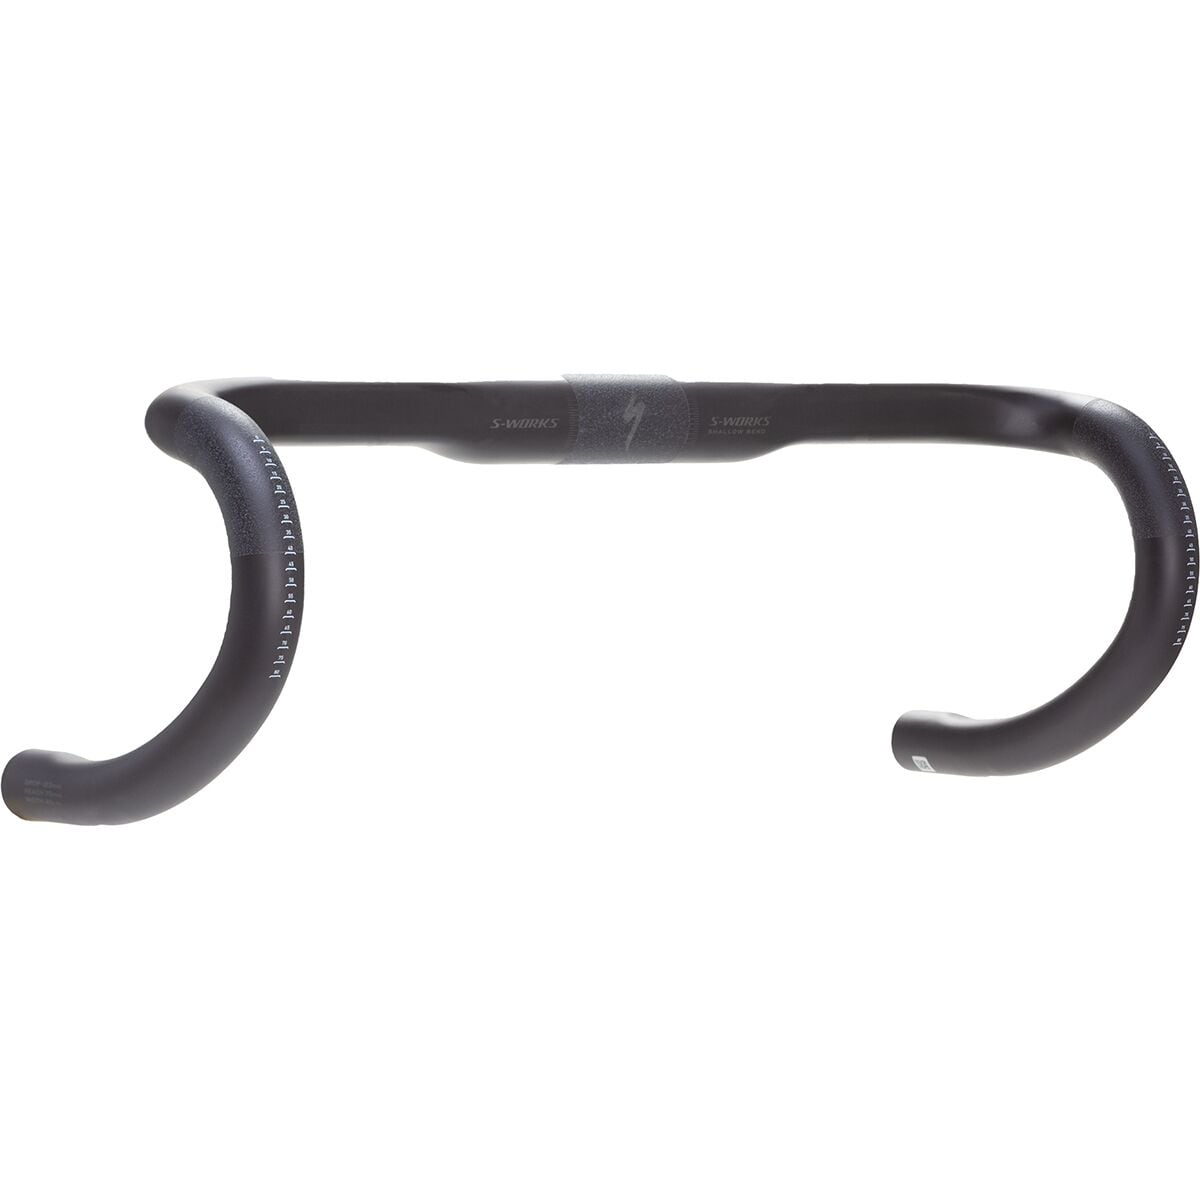 Specialized S-Works Shallow Bend Carbon Handlebar - Components